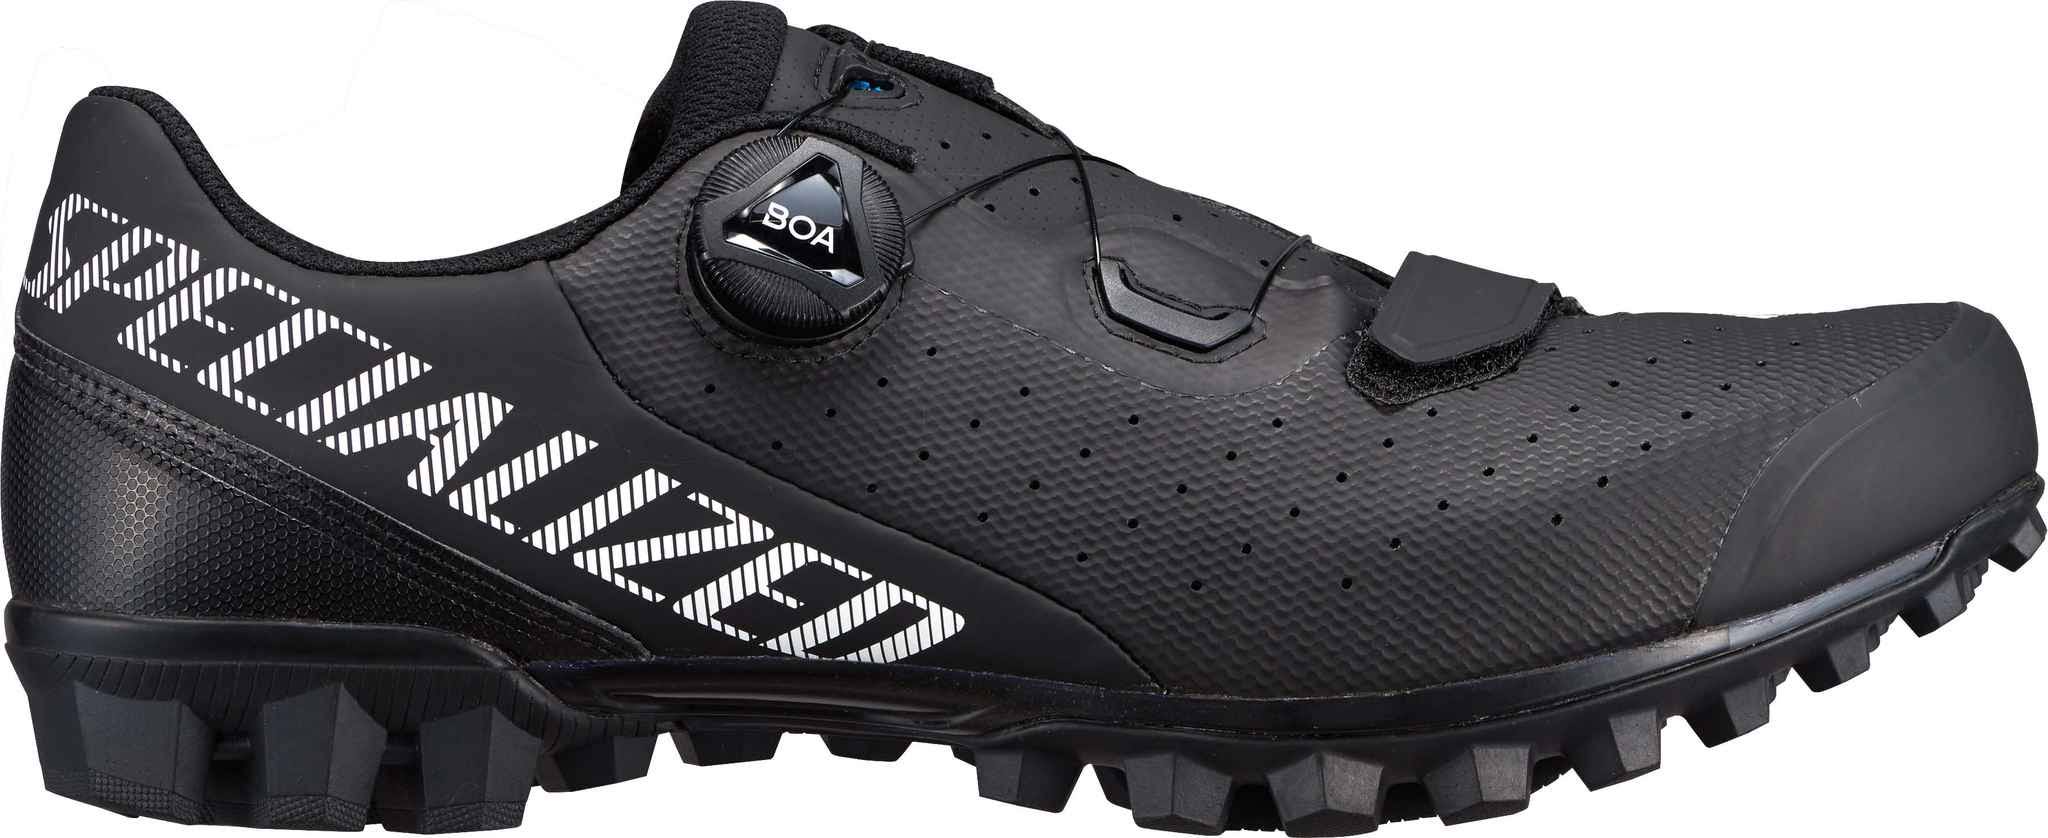 Specialized Recon 2.0 MTB Shoes Black